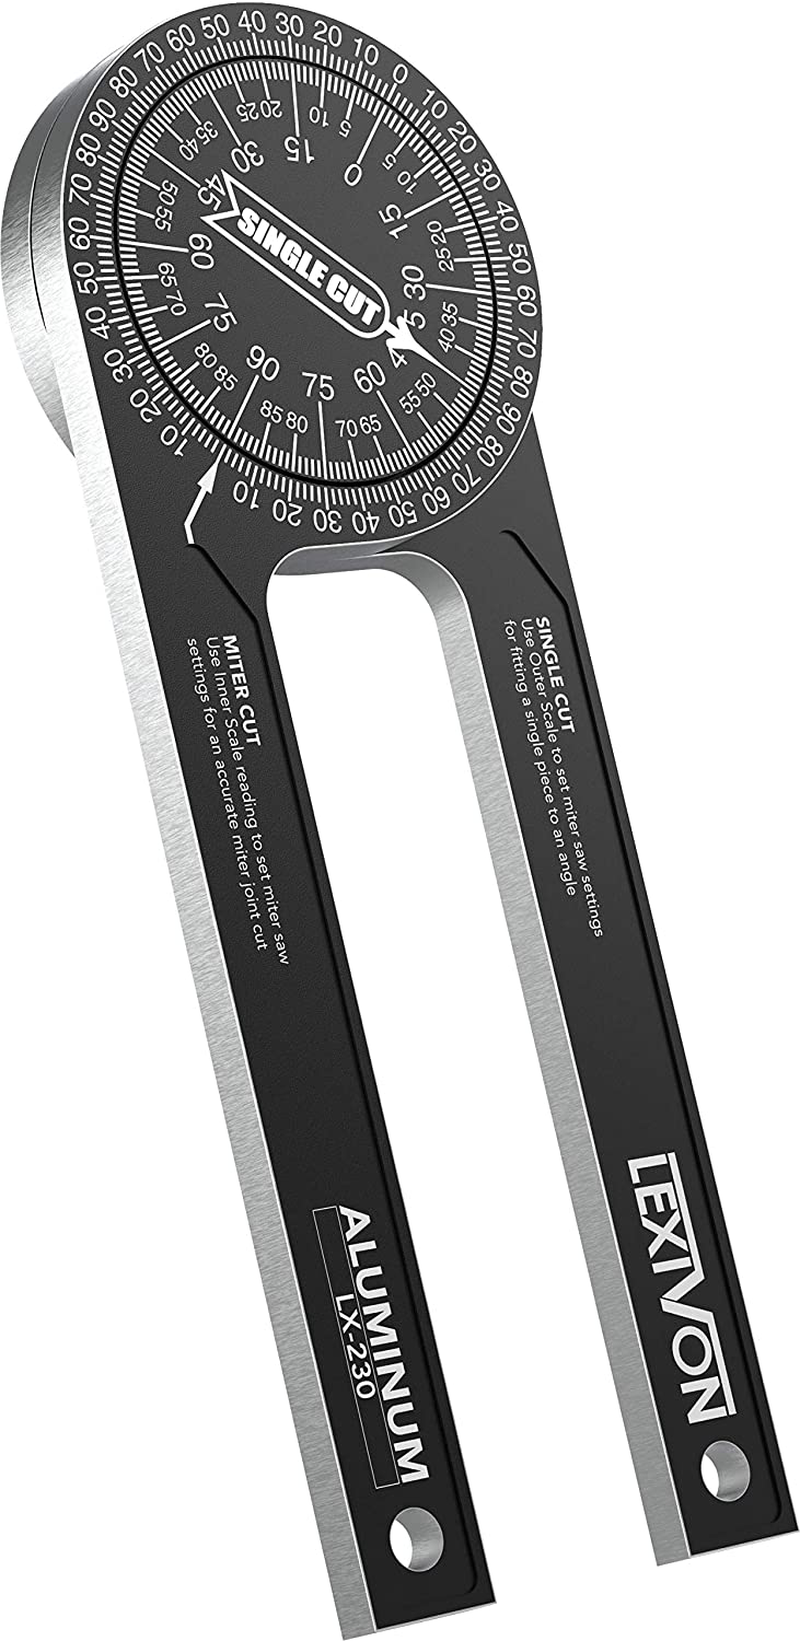 LEXIVON Aluminum Miter Saw Protractor | 7-Inch Rust Proof Angle Finder Featuring Precision Laser Engraved Scales (LX-230)